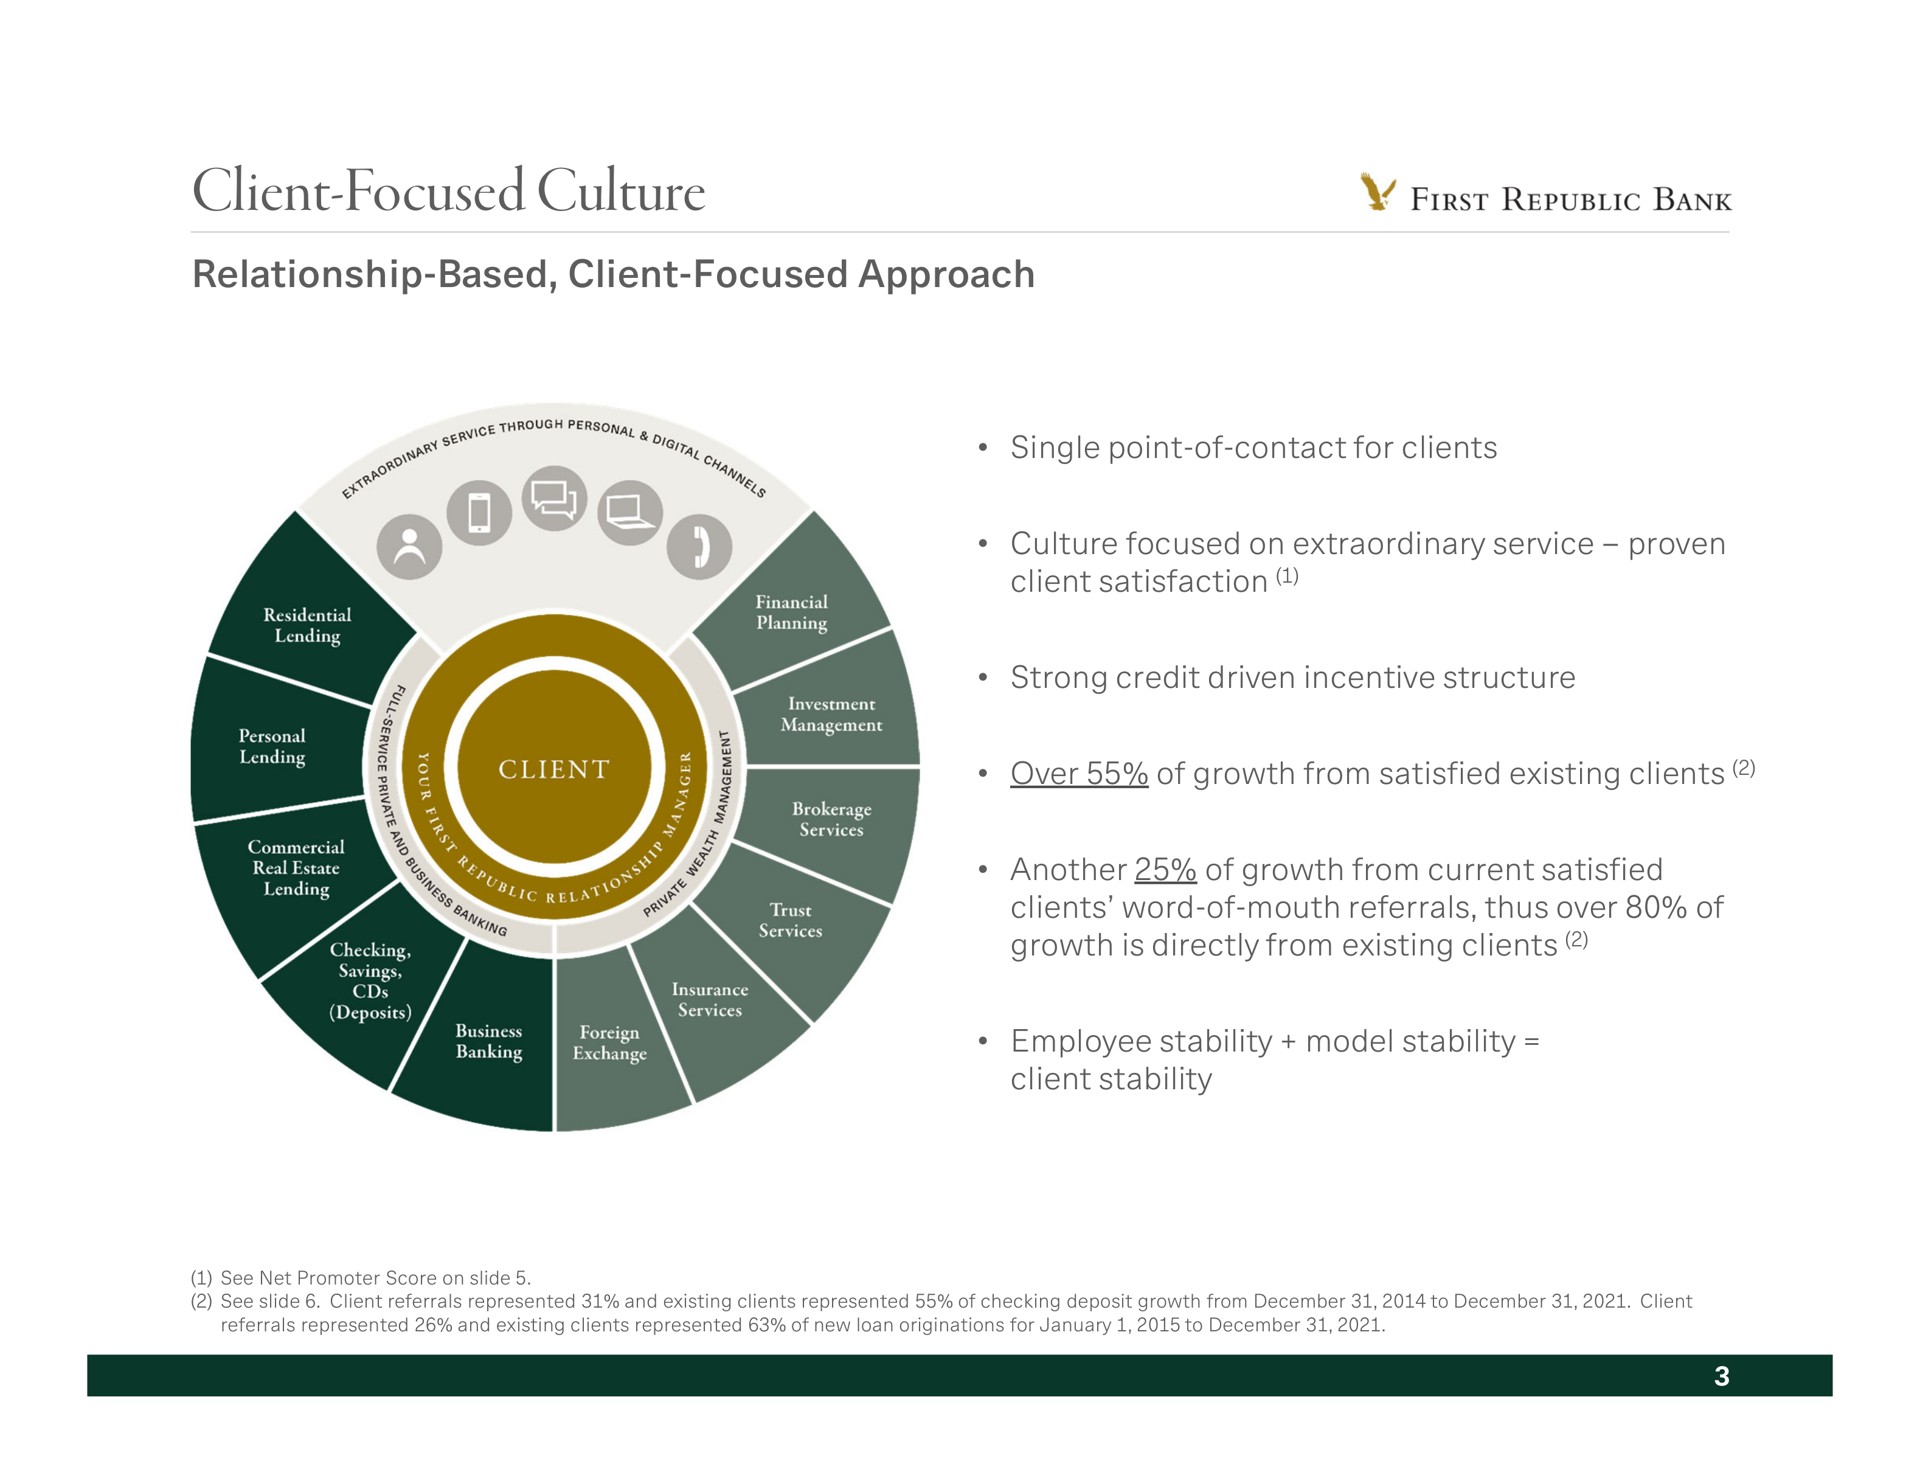 client focused culture relationship based approach per single point of contact for clients | First Republic Bank